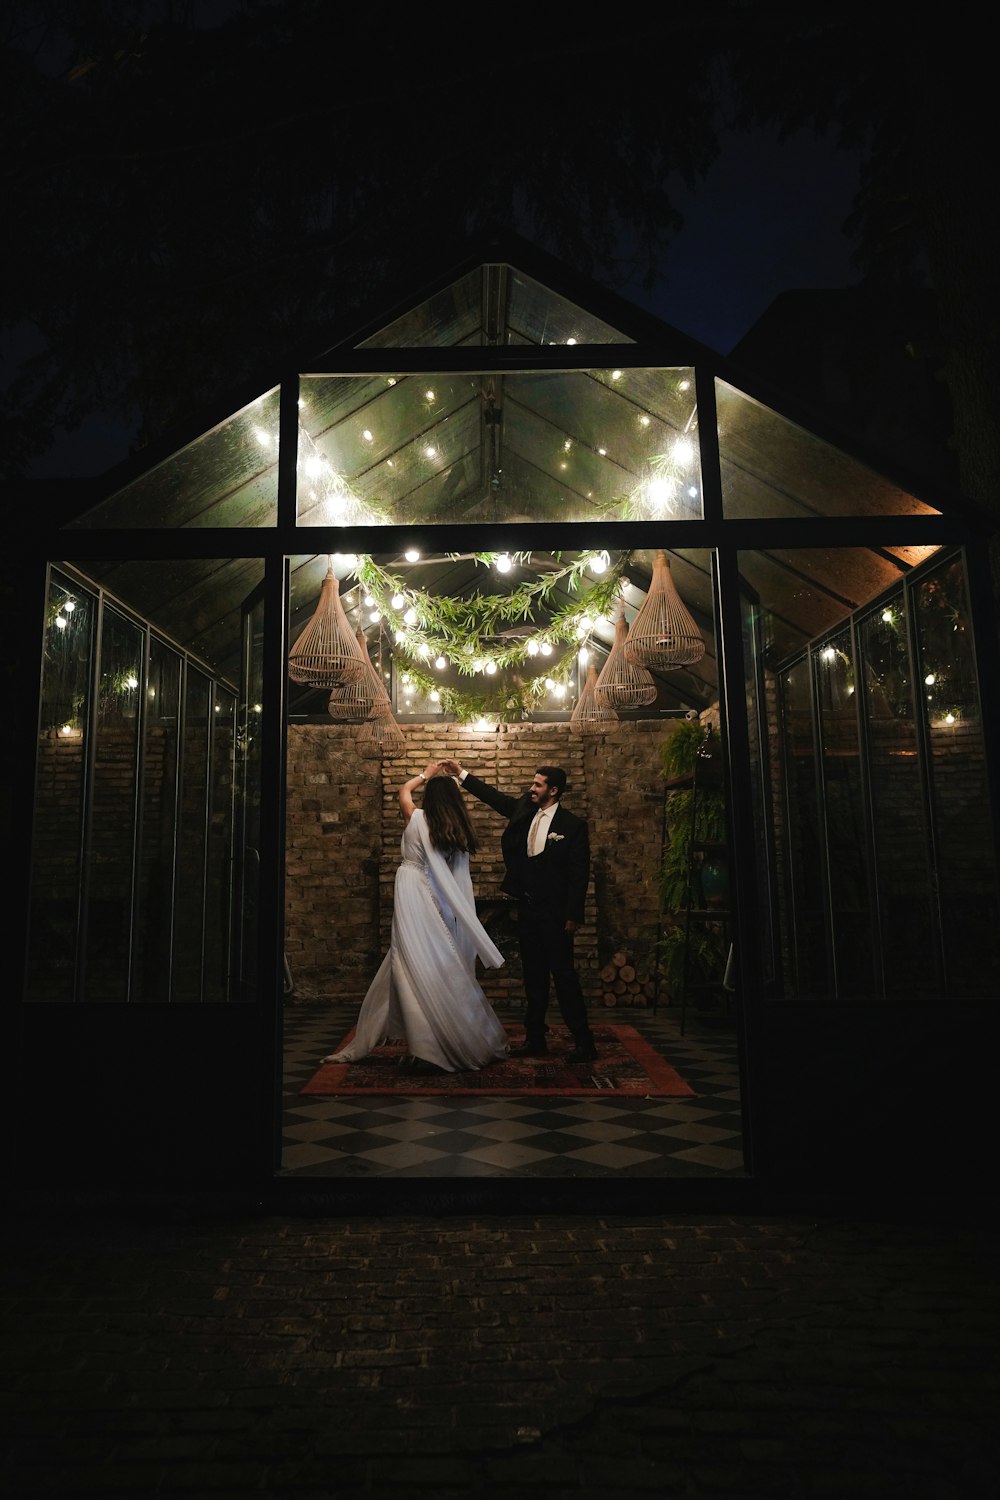 a bride and groom standing under a gazebo at night